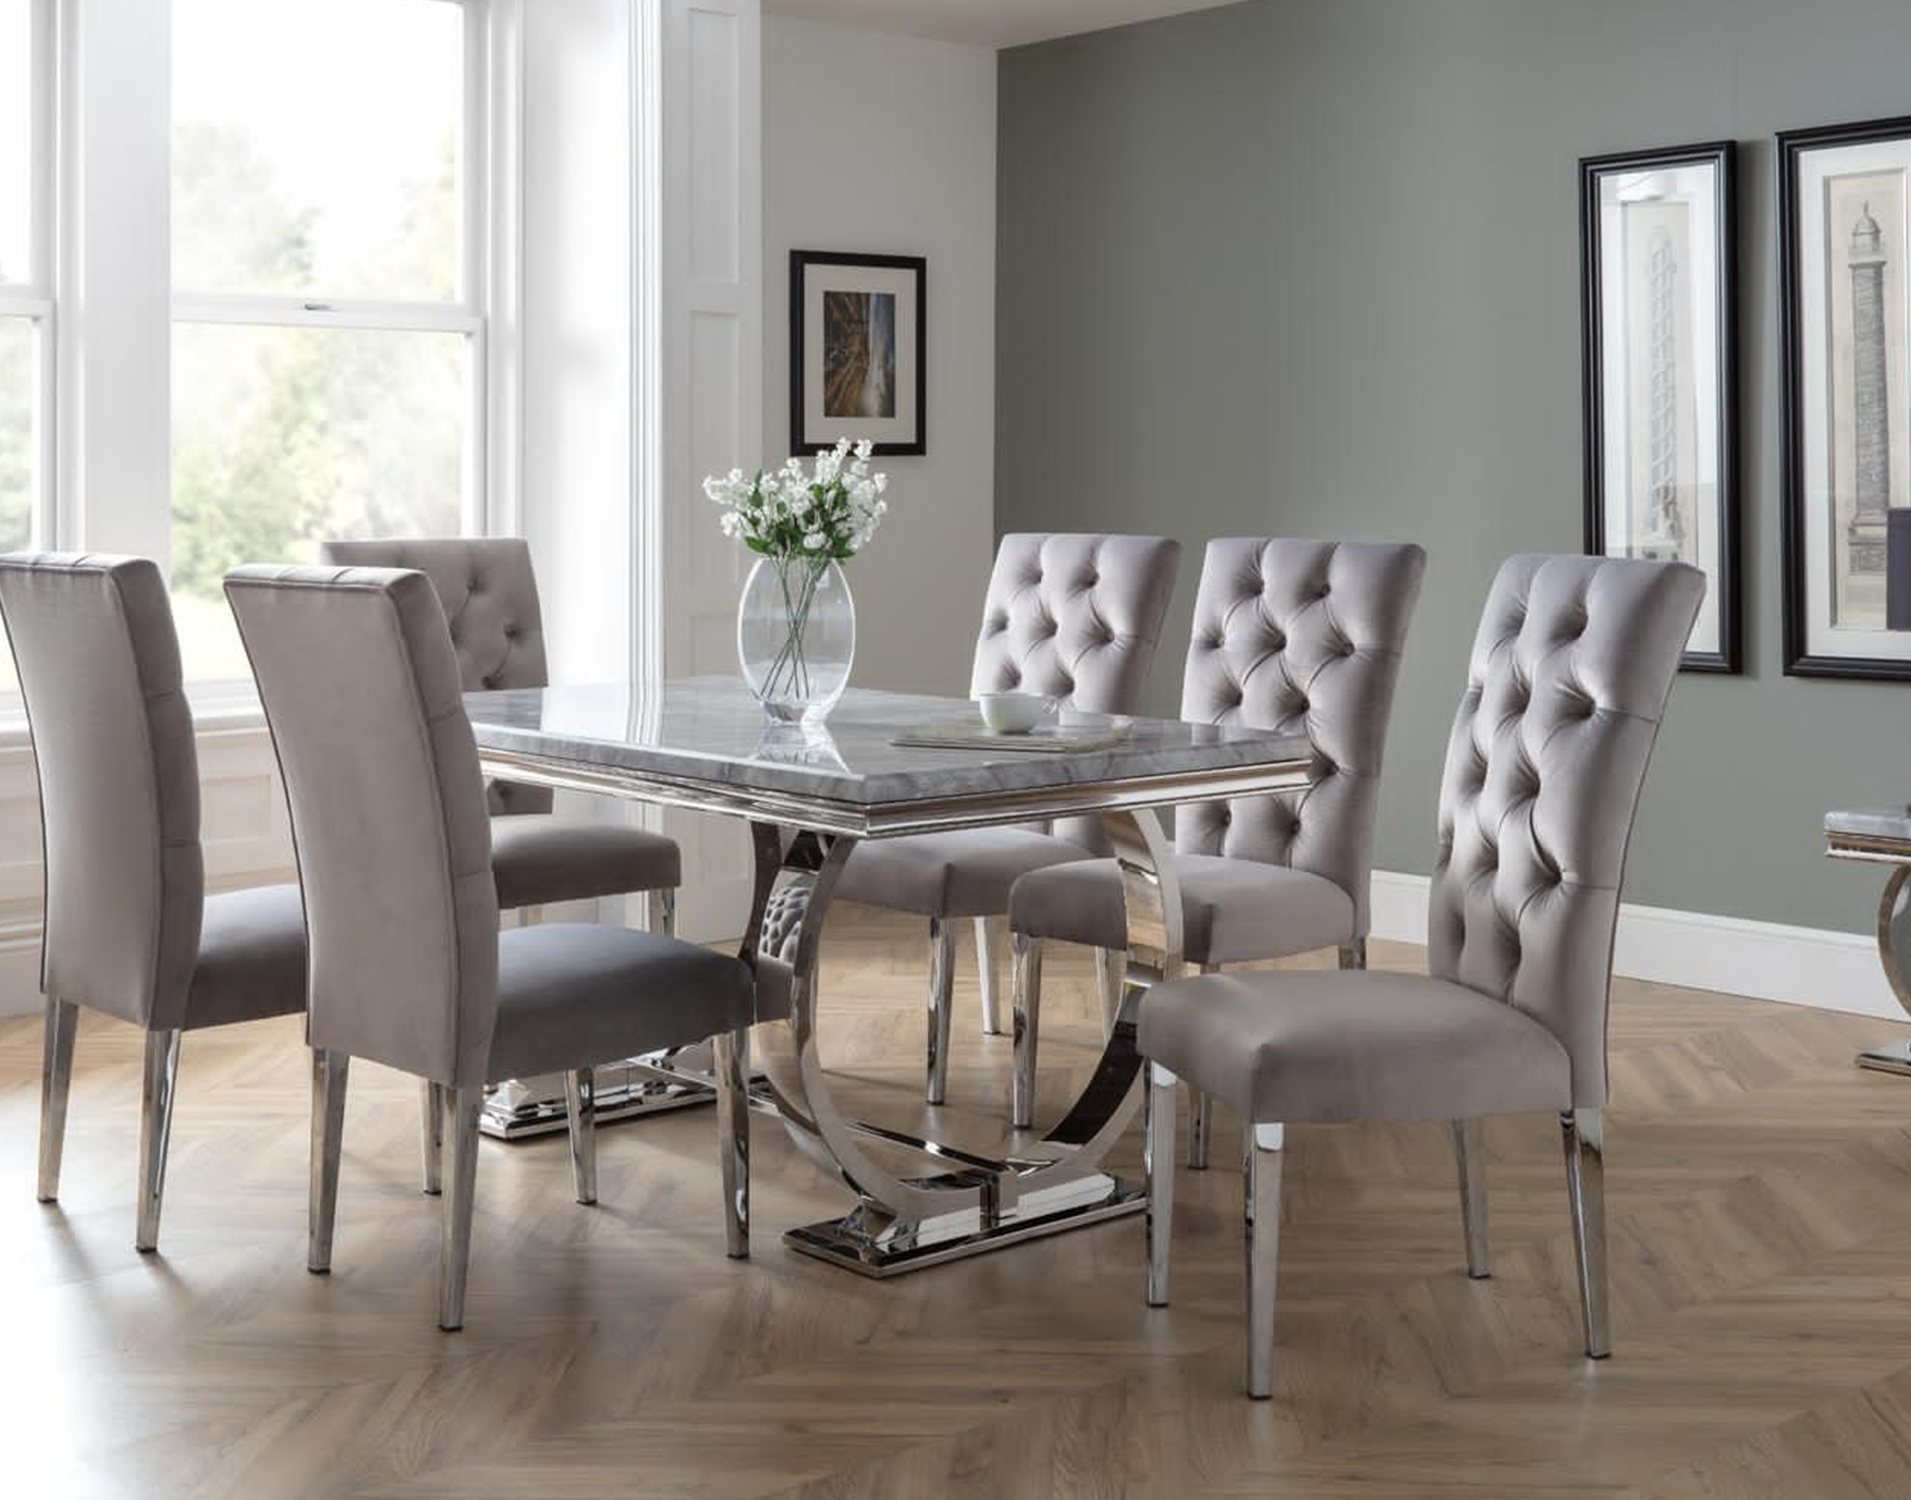 6 chair dining room sets